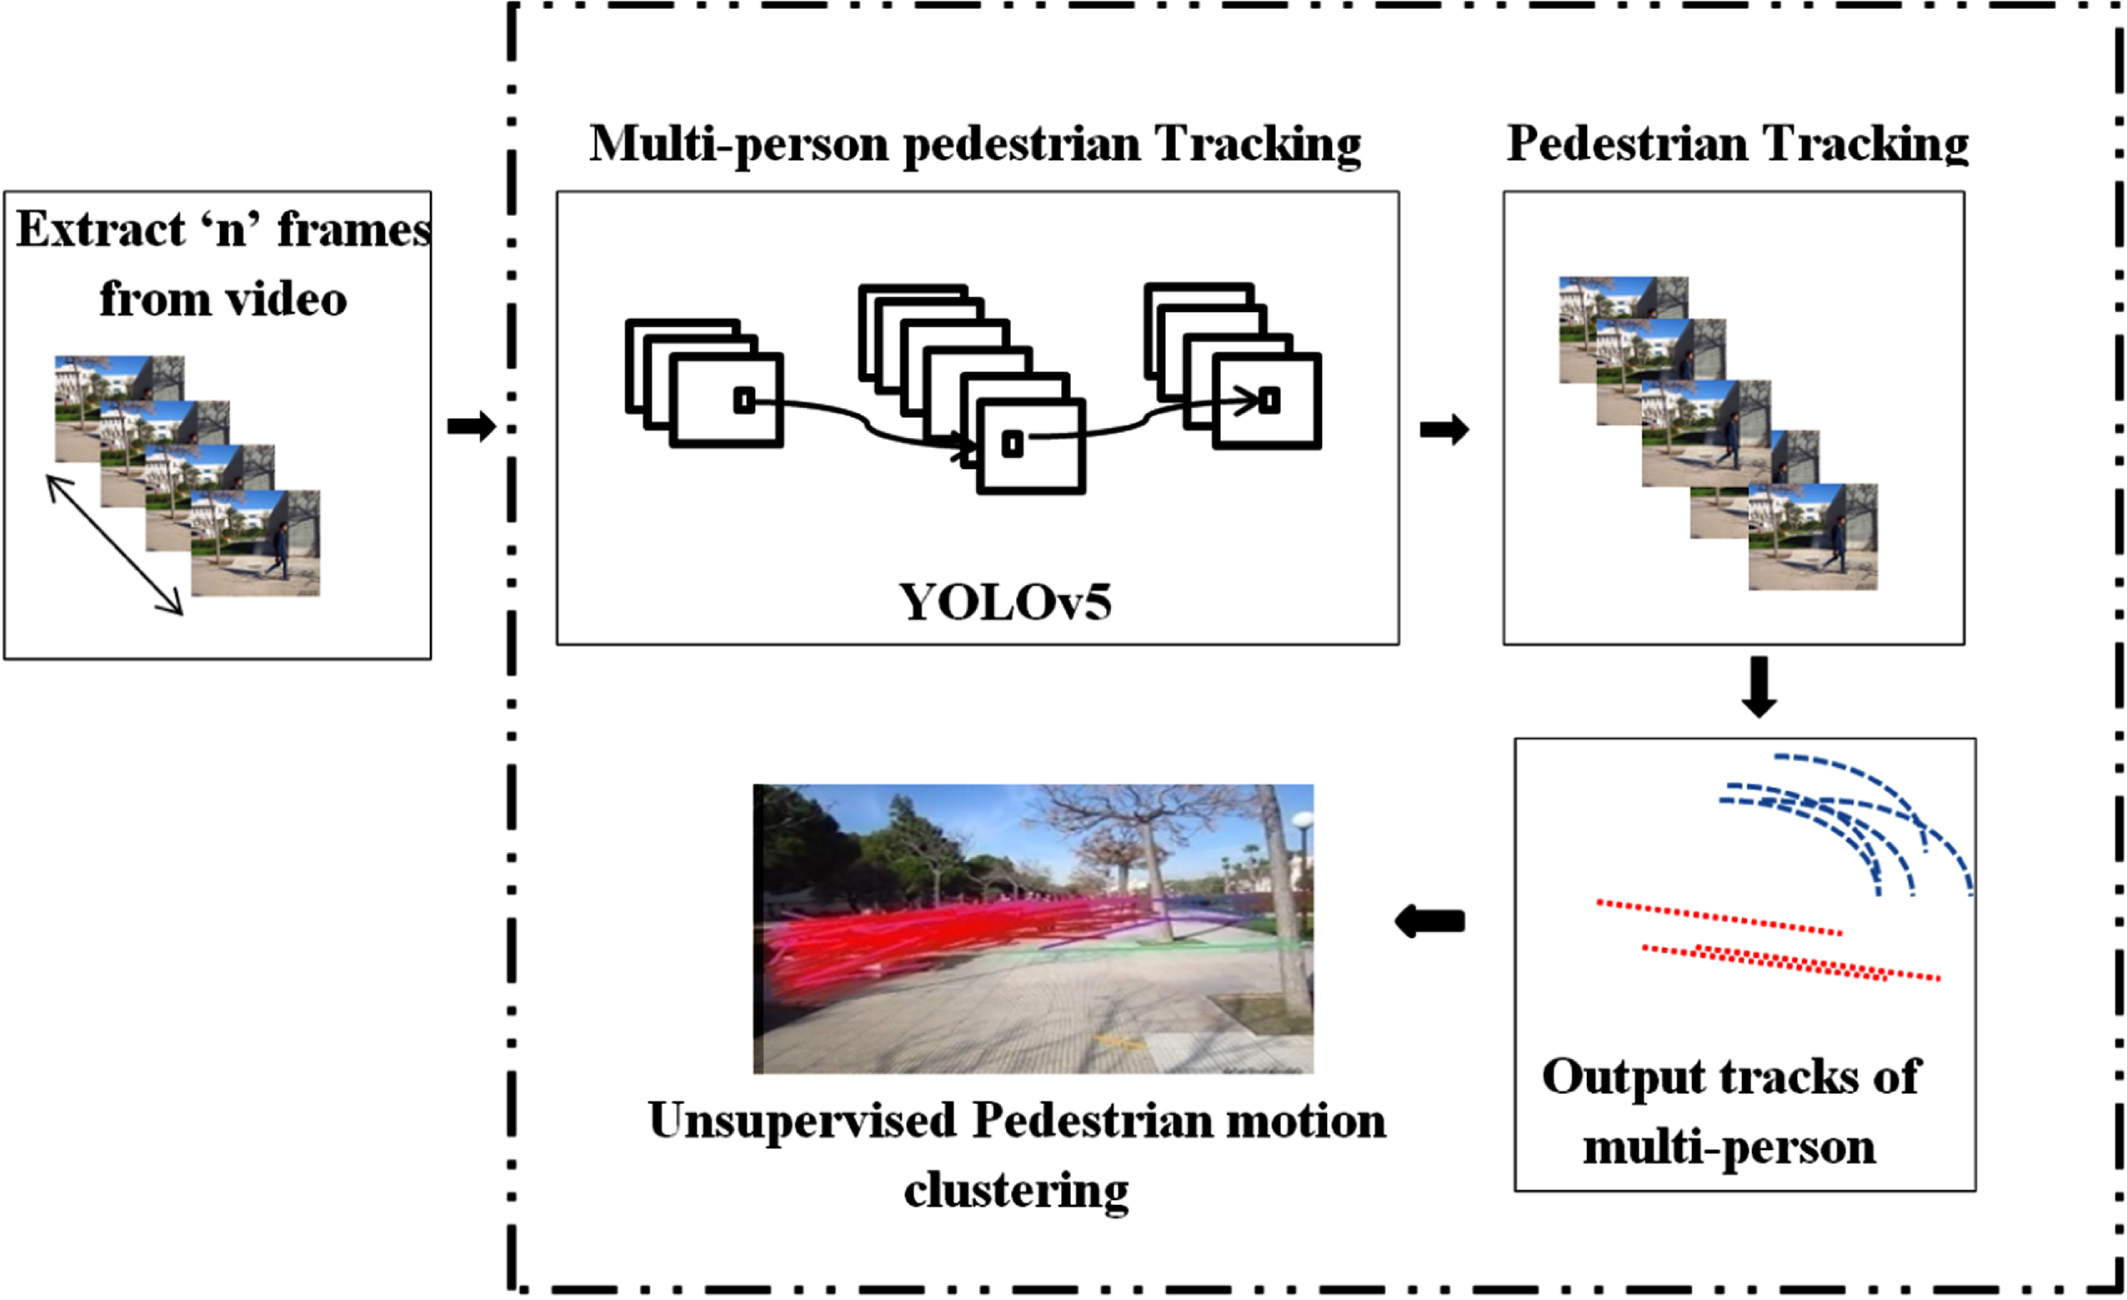 Proposed framework for pedestrian direction of motion recognition. In step 1, we take video as input and then perform a deep learning model YOLOv5 for pedestrian detection. In step 2, we track pedestrians across the frame. In step 3, we perform unsupervised incremental clustering of the pedestrian direction of motion recognition.